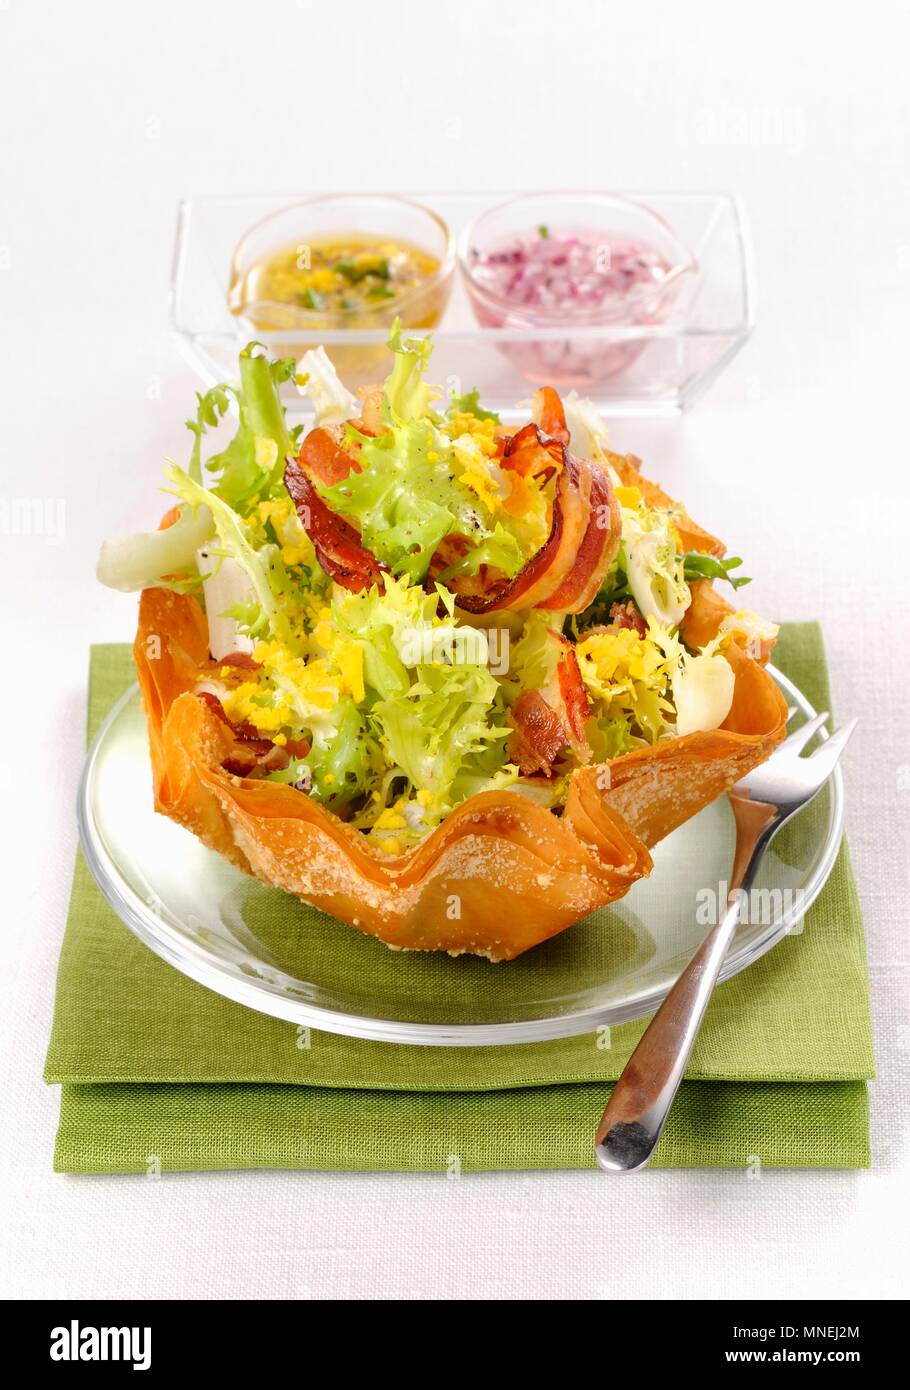 Frisee lettuce salad with bacon and egg Stock Photo